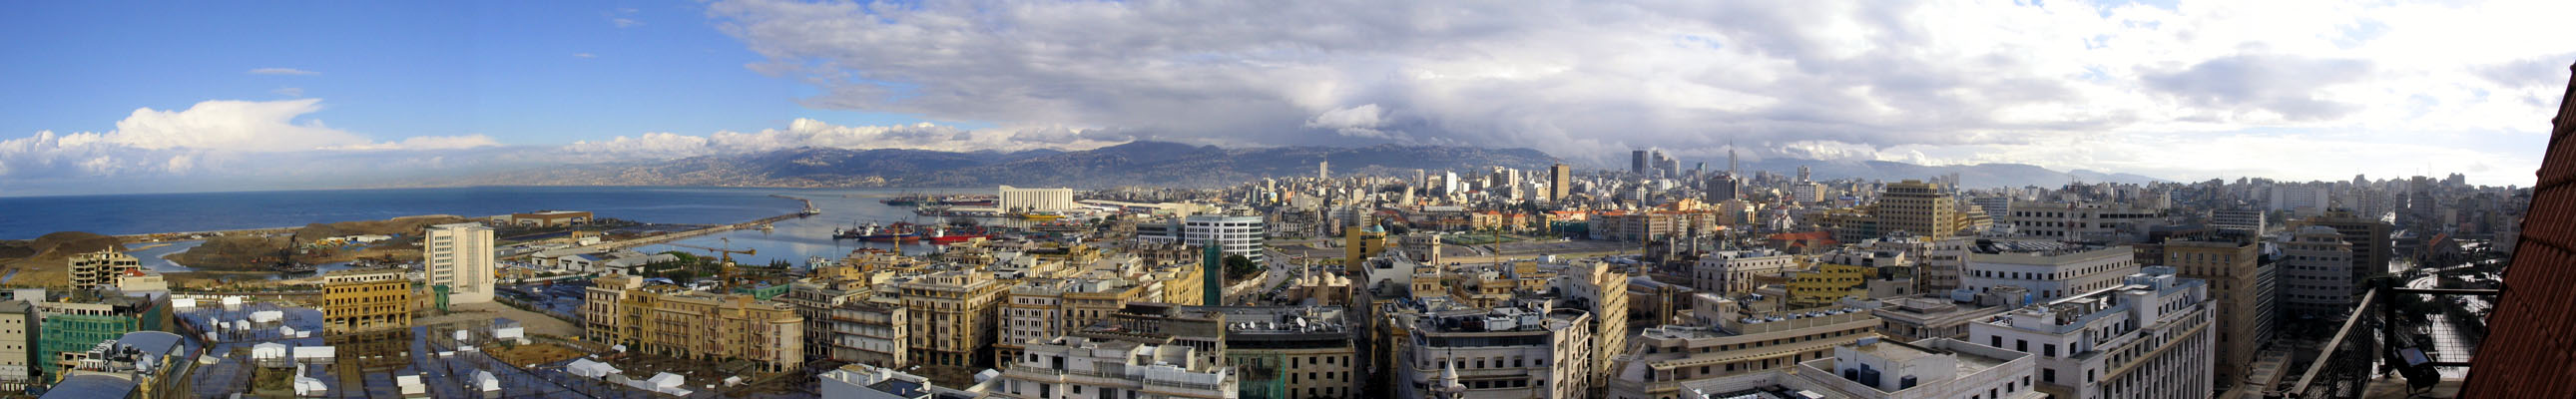  Beirut - Panoramic view from north to south taken from the St. Louis clock tower, with Beirut's harbor and wheat silos seen on the left and the tall buildings of the Ashrafieh neighborhood on the right. The Kesrouan and Metn mountains are seen in the background